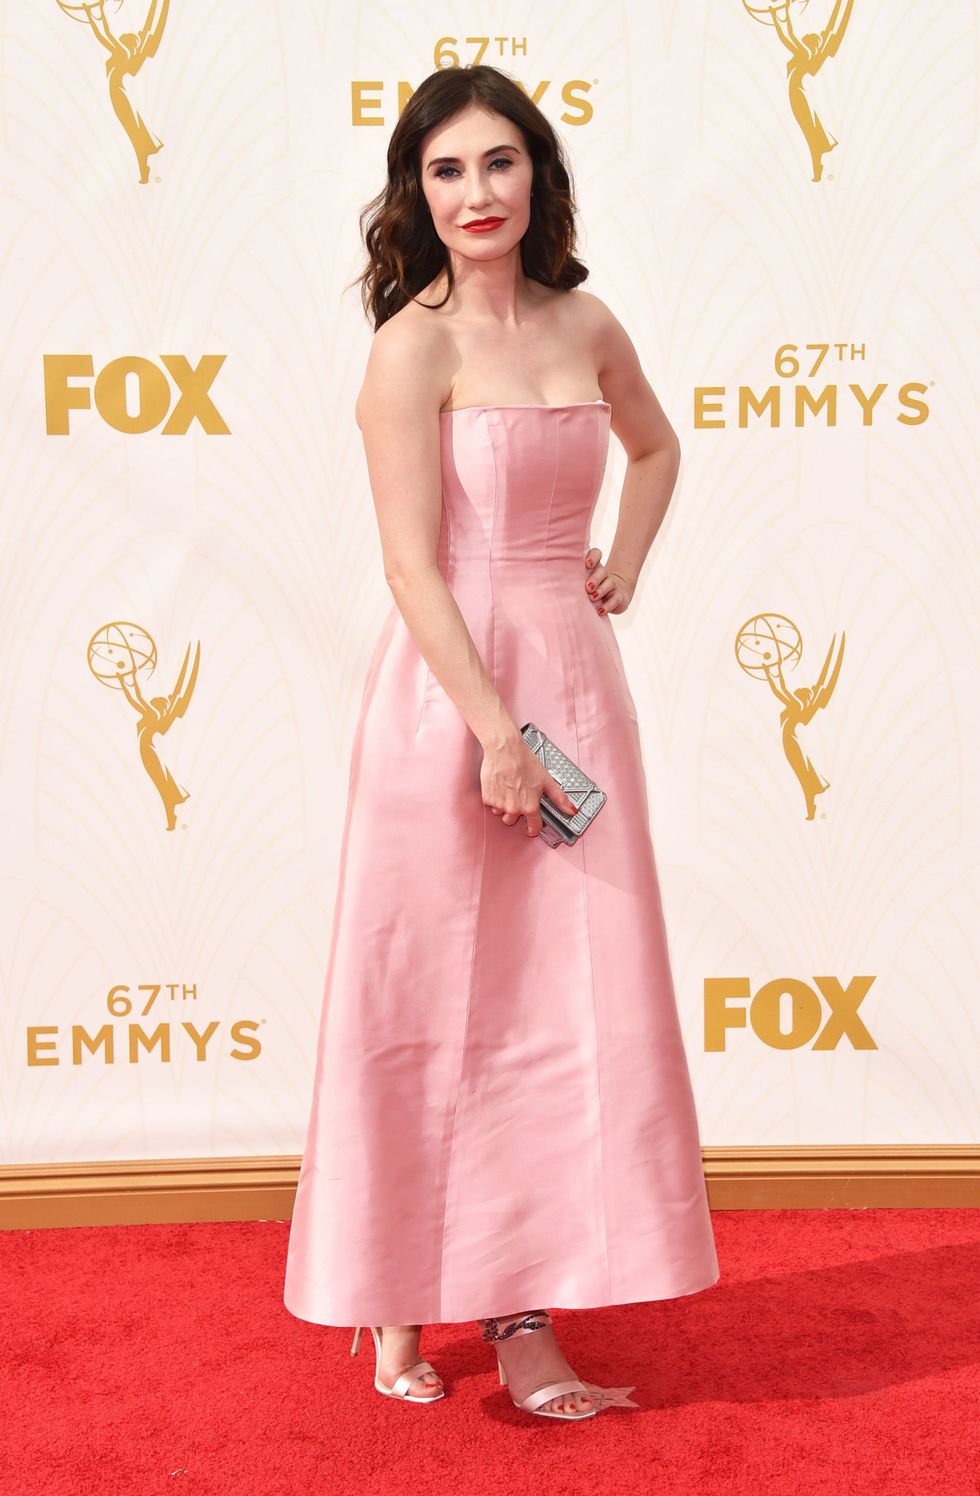 Red carpet, Clothing, Dress, Carpet, Pink, Shoulder, Strapless dress, Flooring, Hairstyle, Gown, 